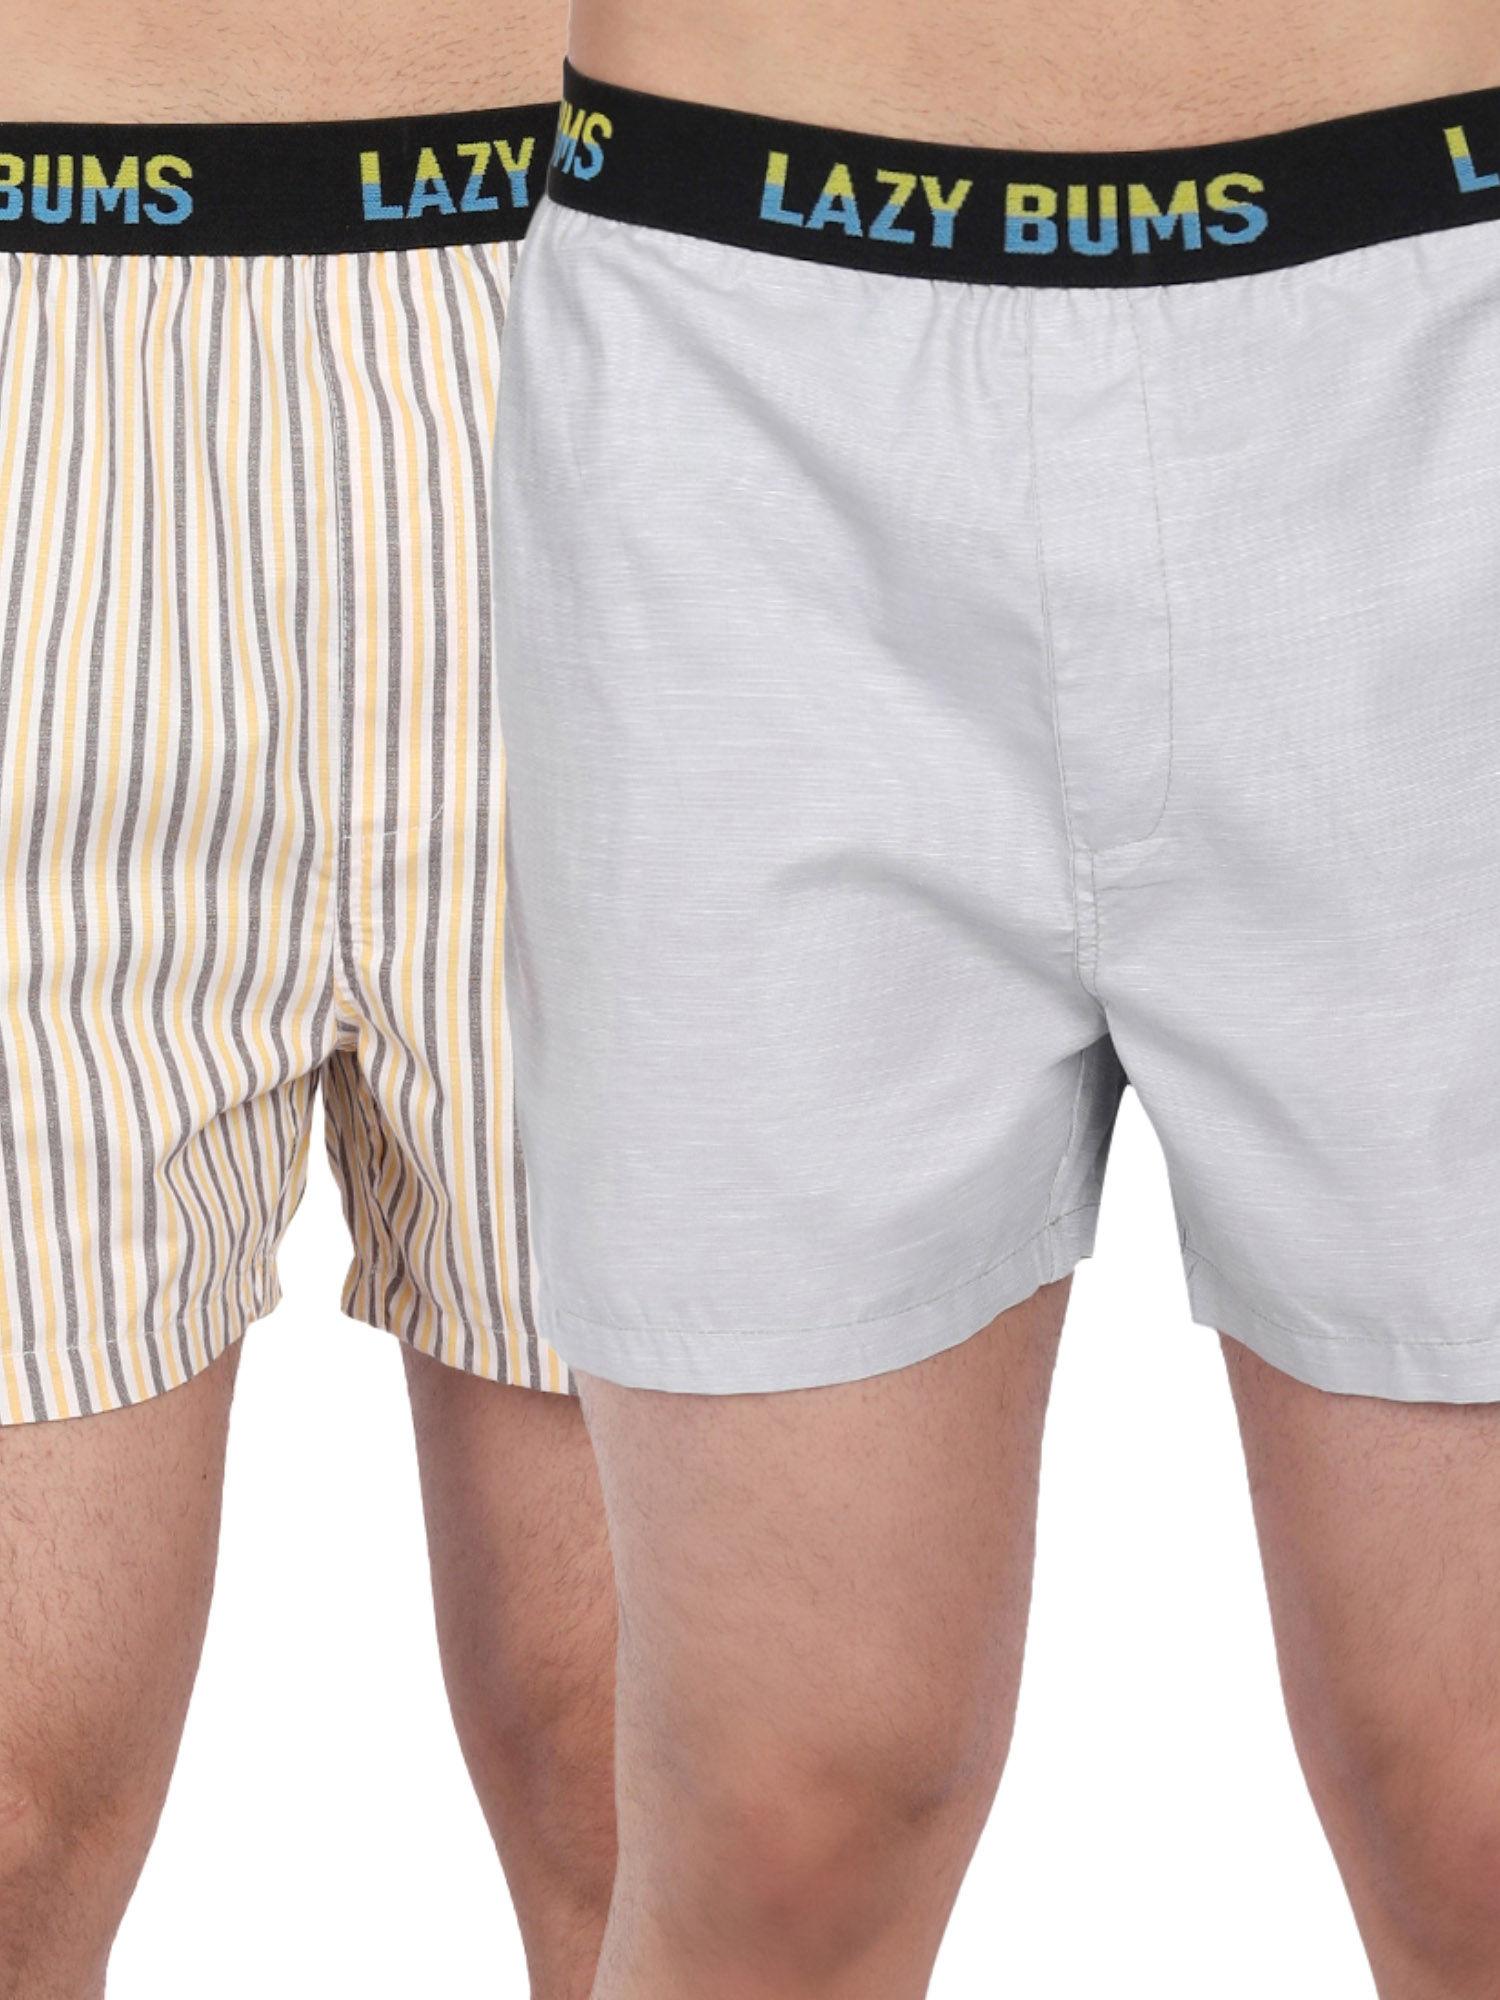 men's combed cotton breeze boxer shorts regular fit boxers (pack of 2)